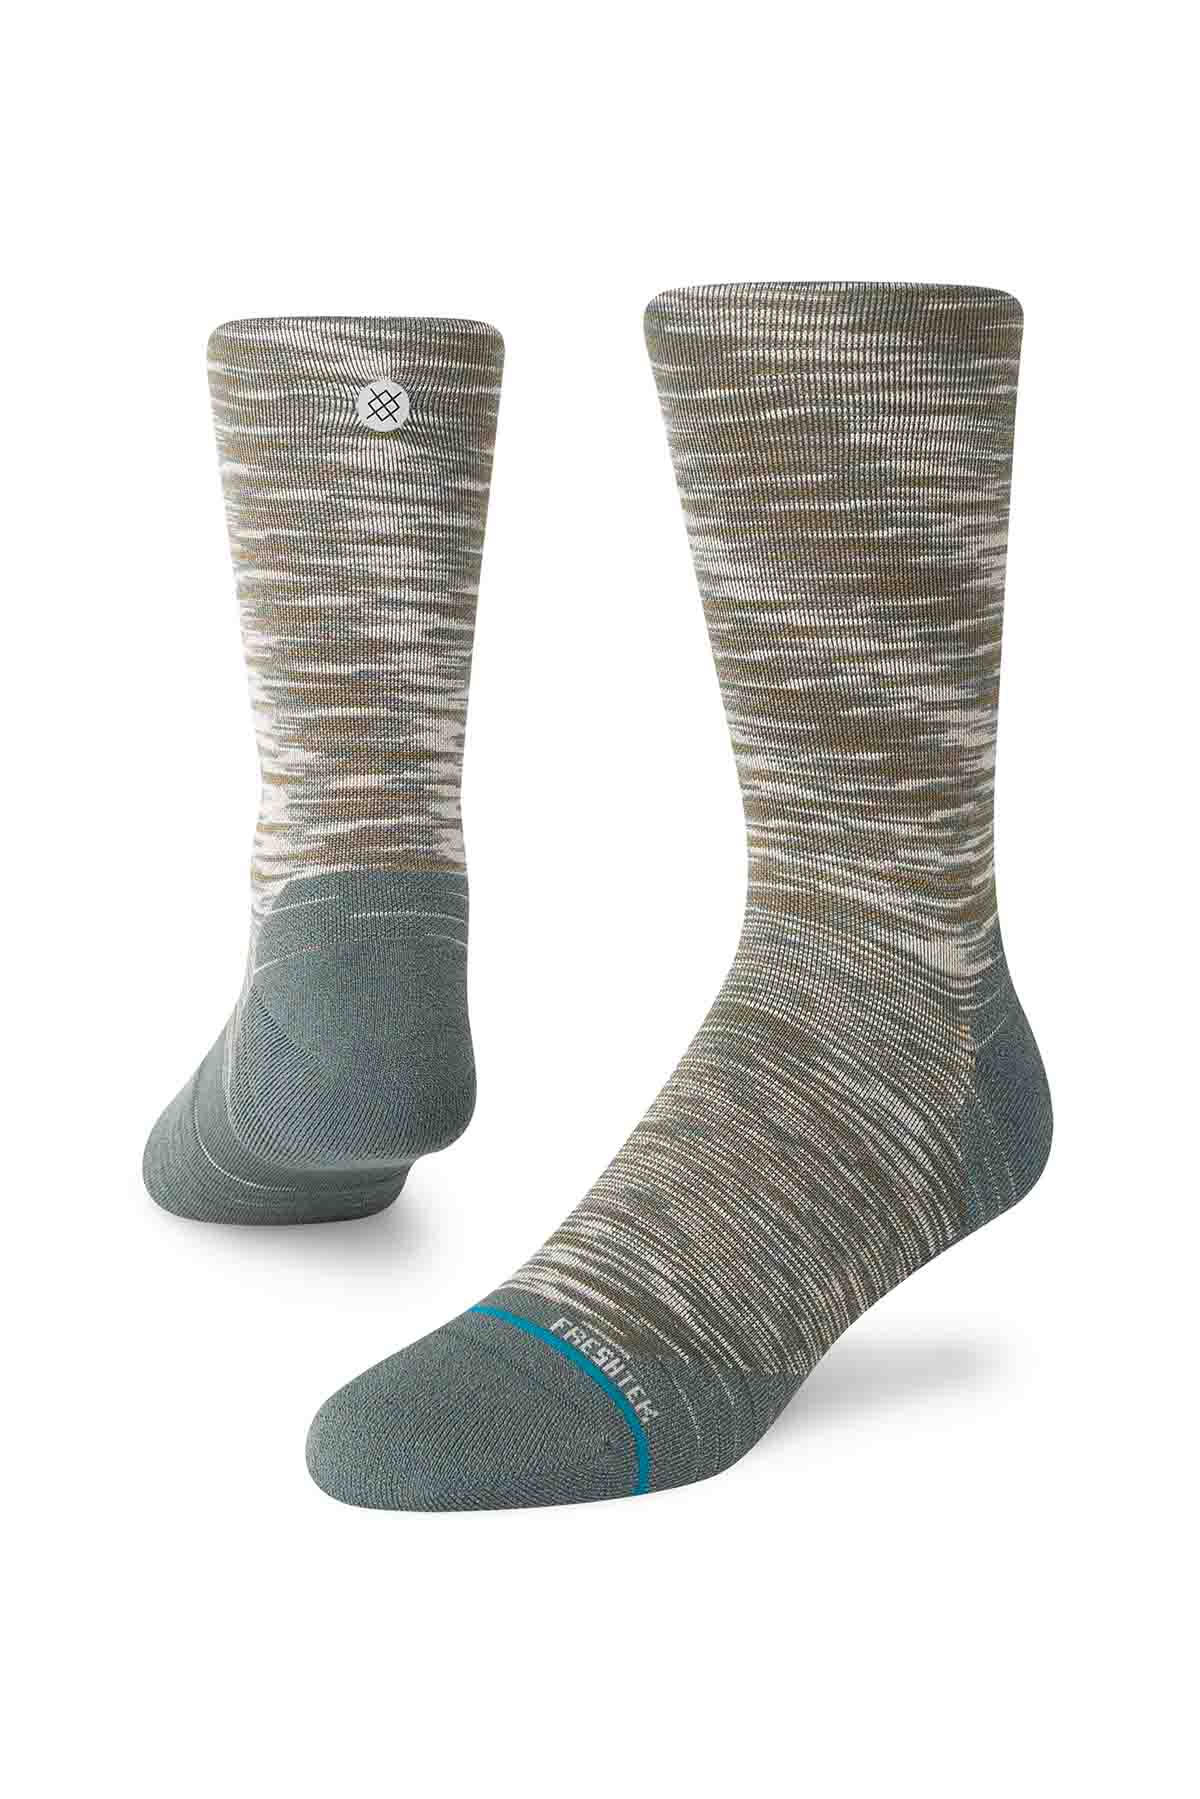 Stance - Marshes - Multi